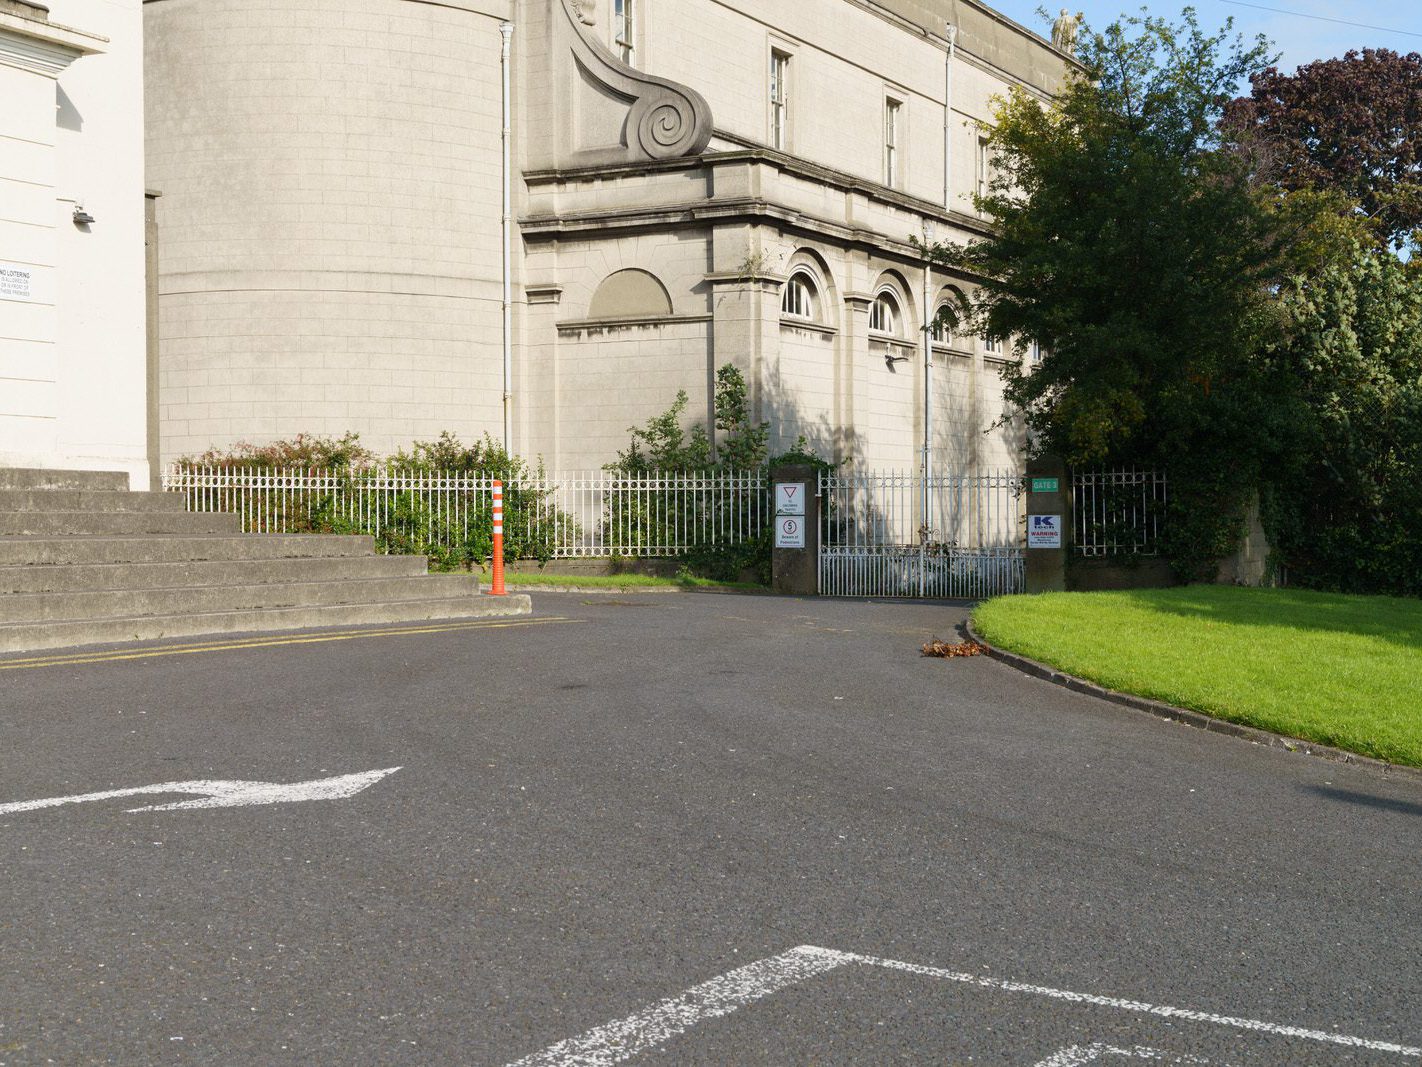 HOLY CROSS COLLEGE - ALSO KNOWN AS CLONLIFFE COLLEGE [THIS HAS CEASED SINCE MY LAST VISIT IN 2014] 006